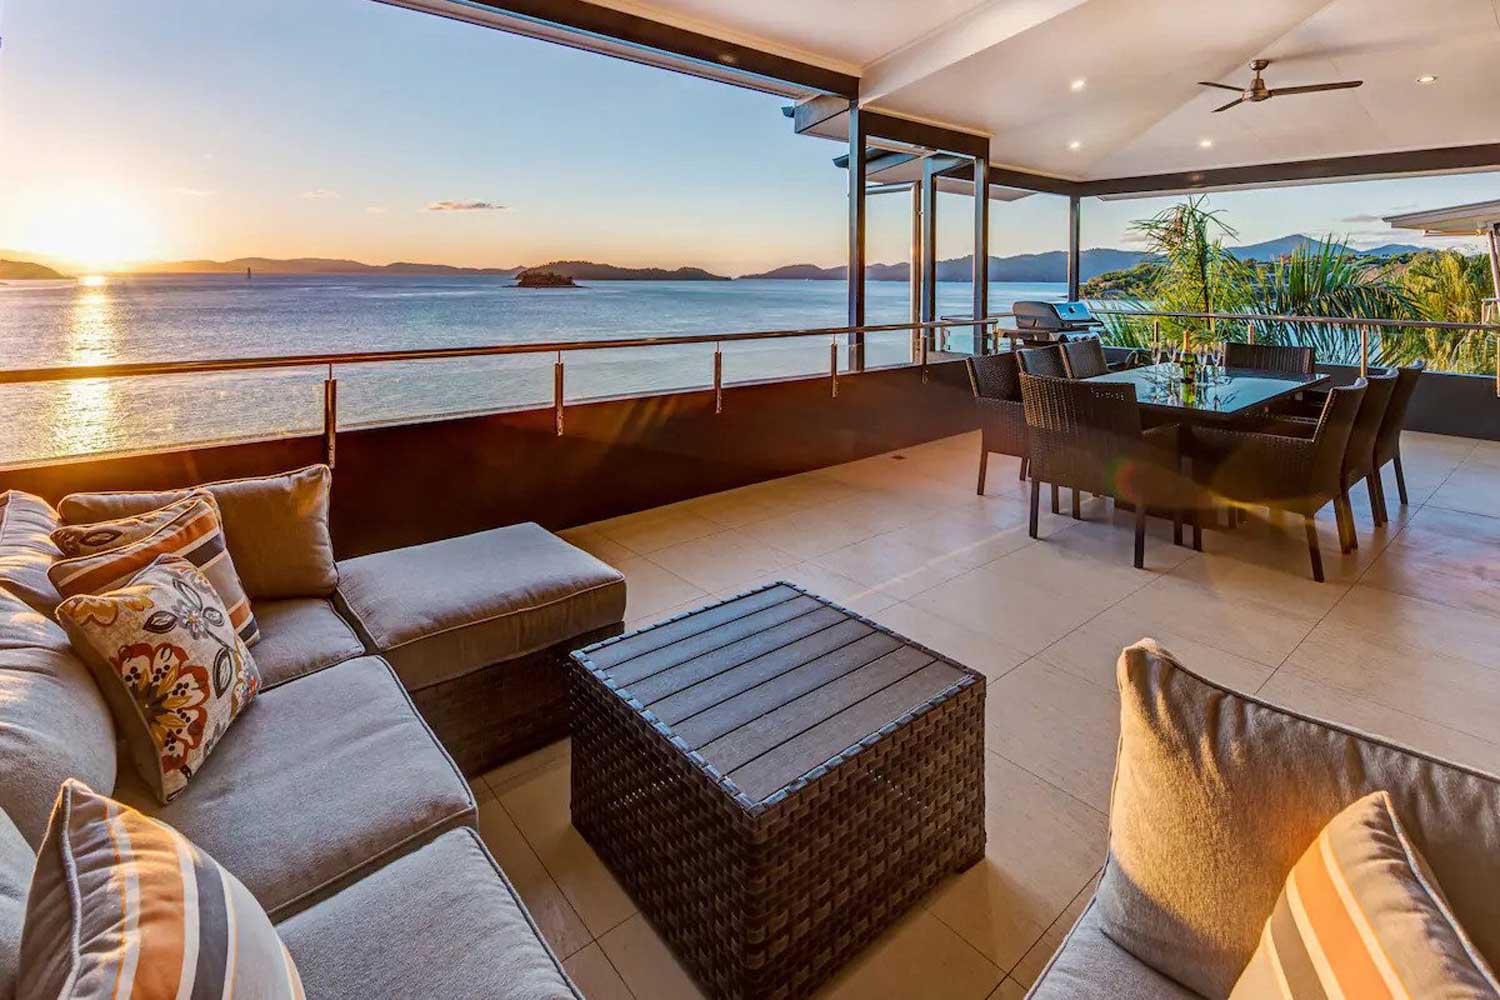 The 10 Best & Coolest Airbnbs In The Whitsundays